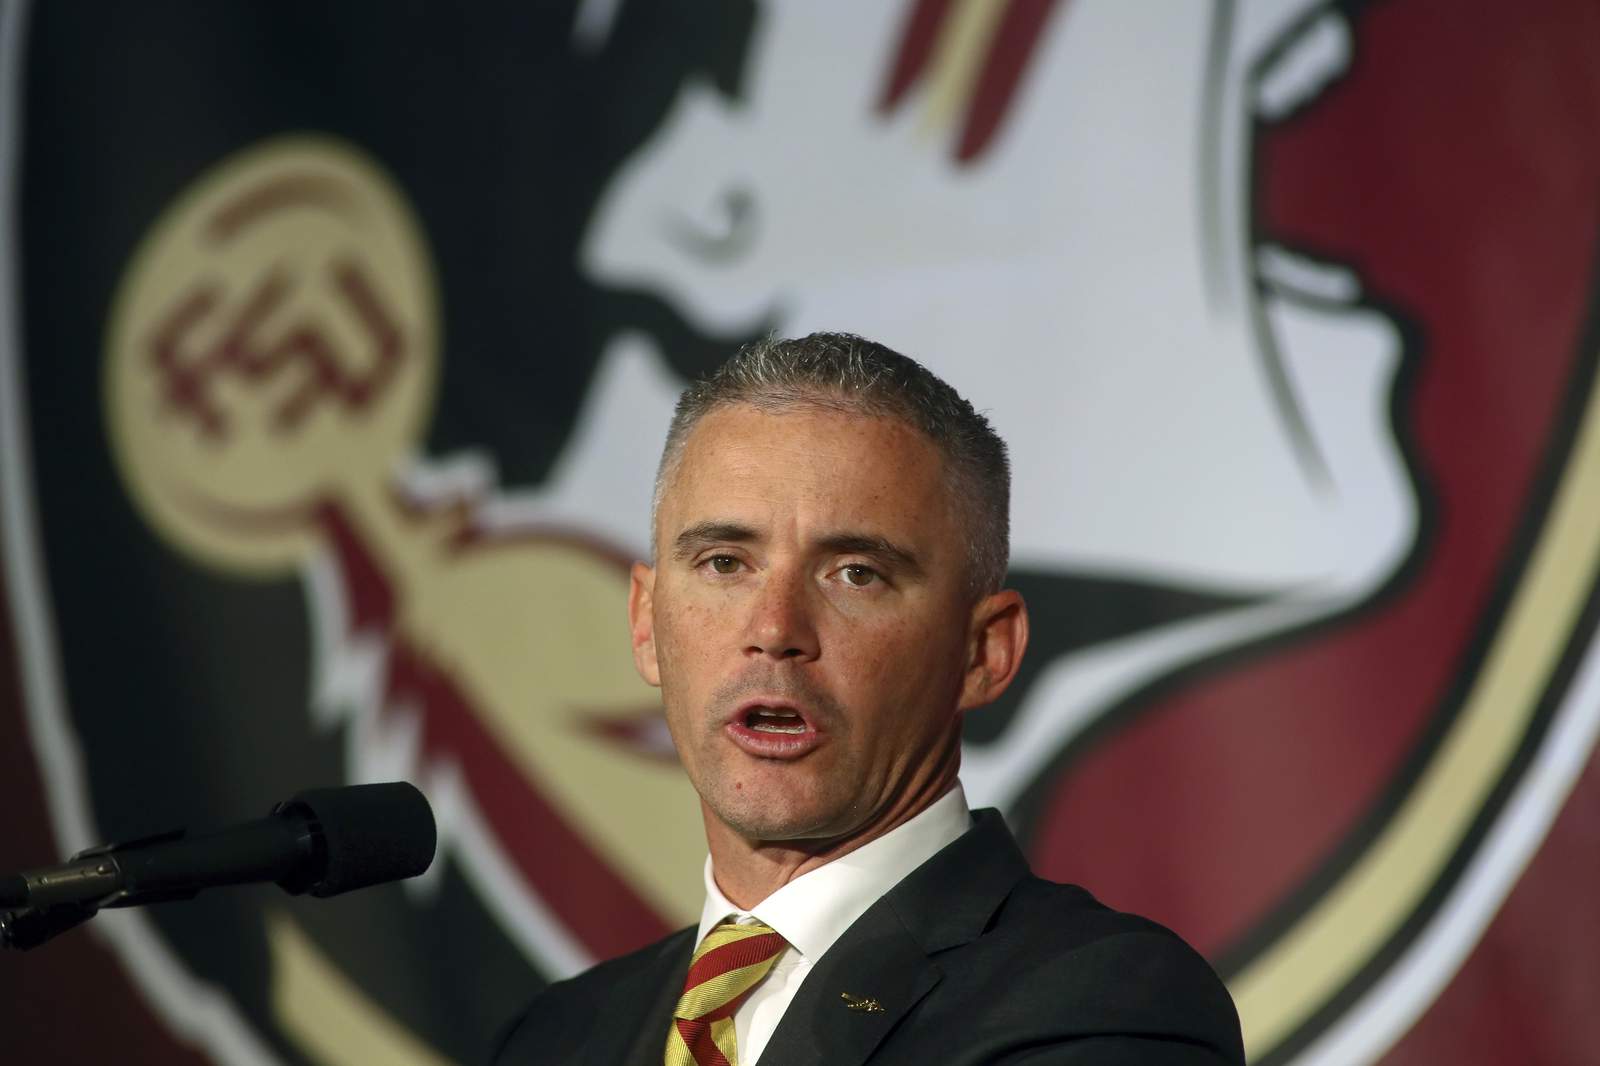 FSU coach Norvell tests positive for virus before Miami